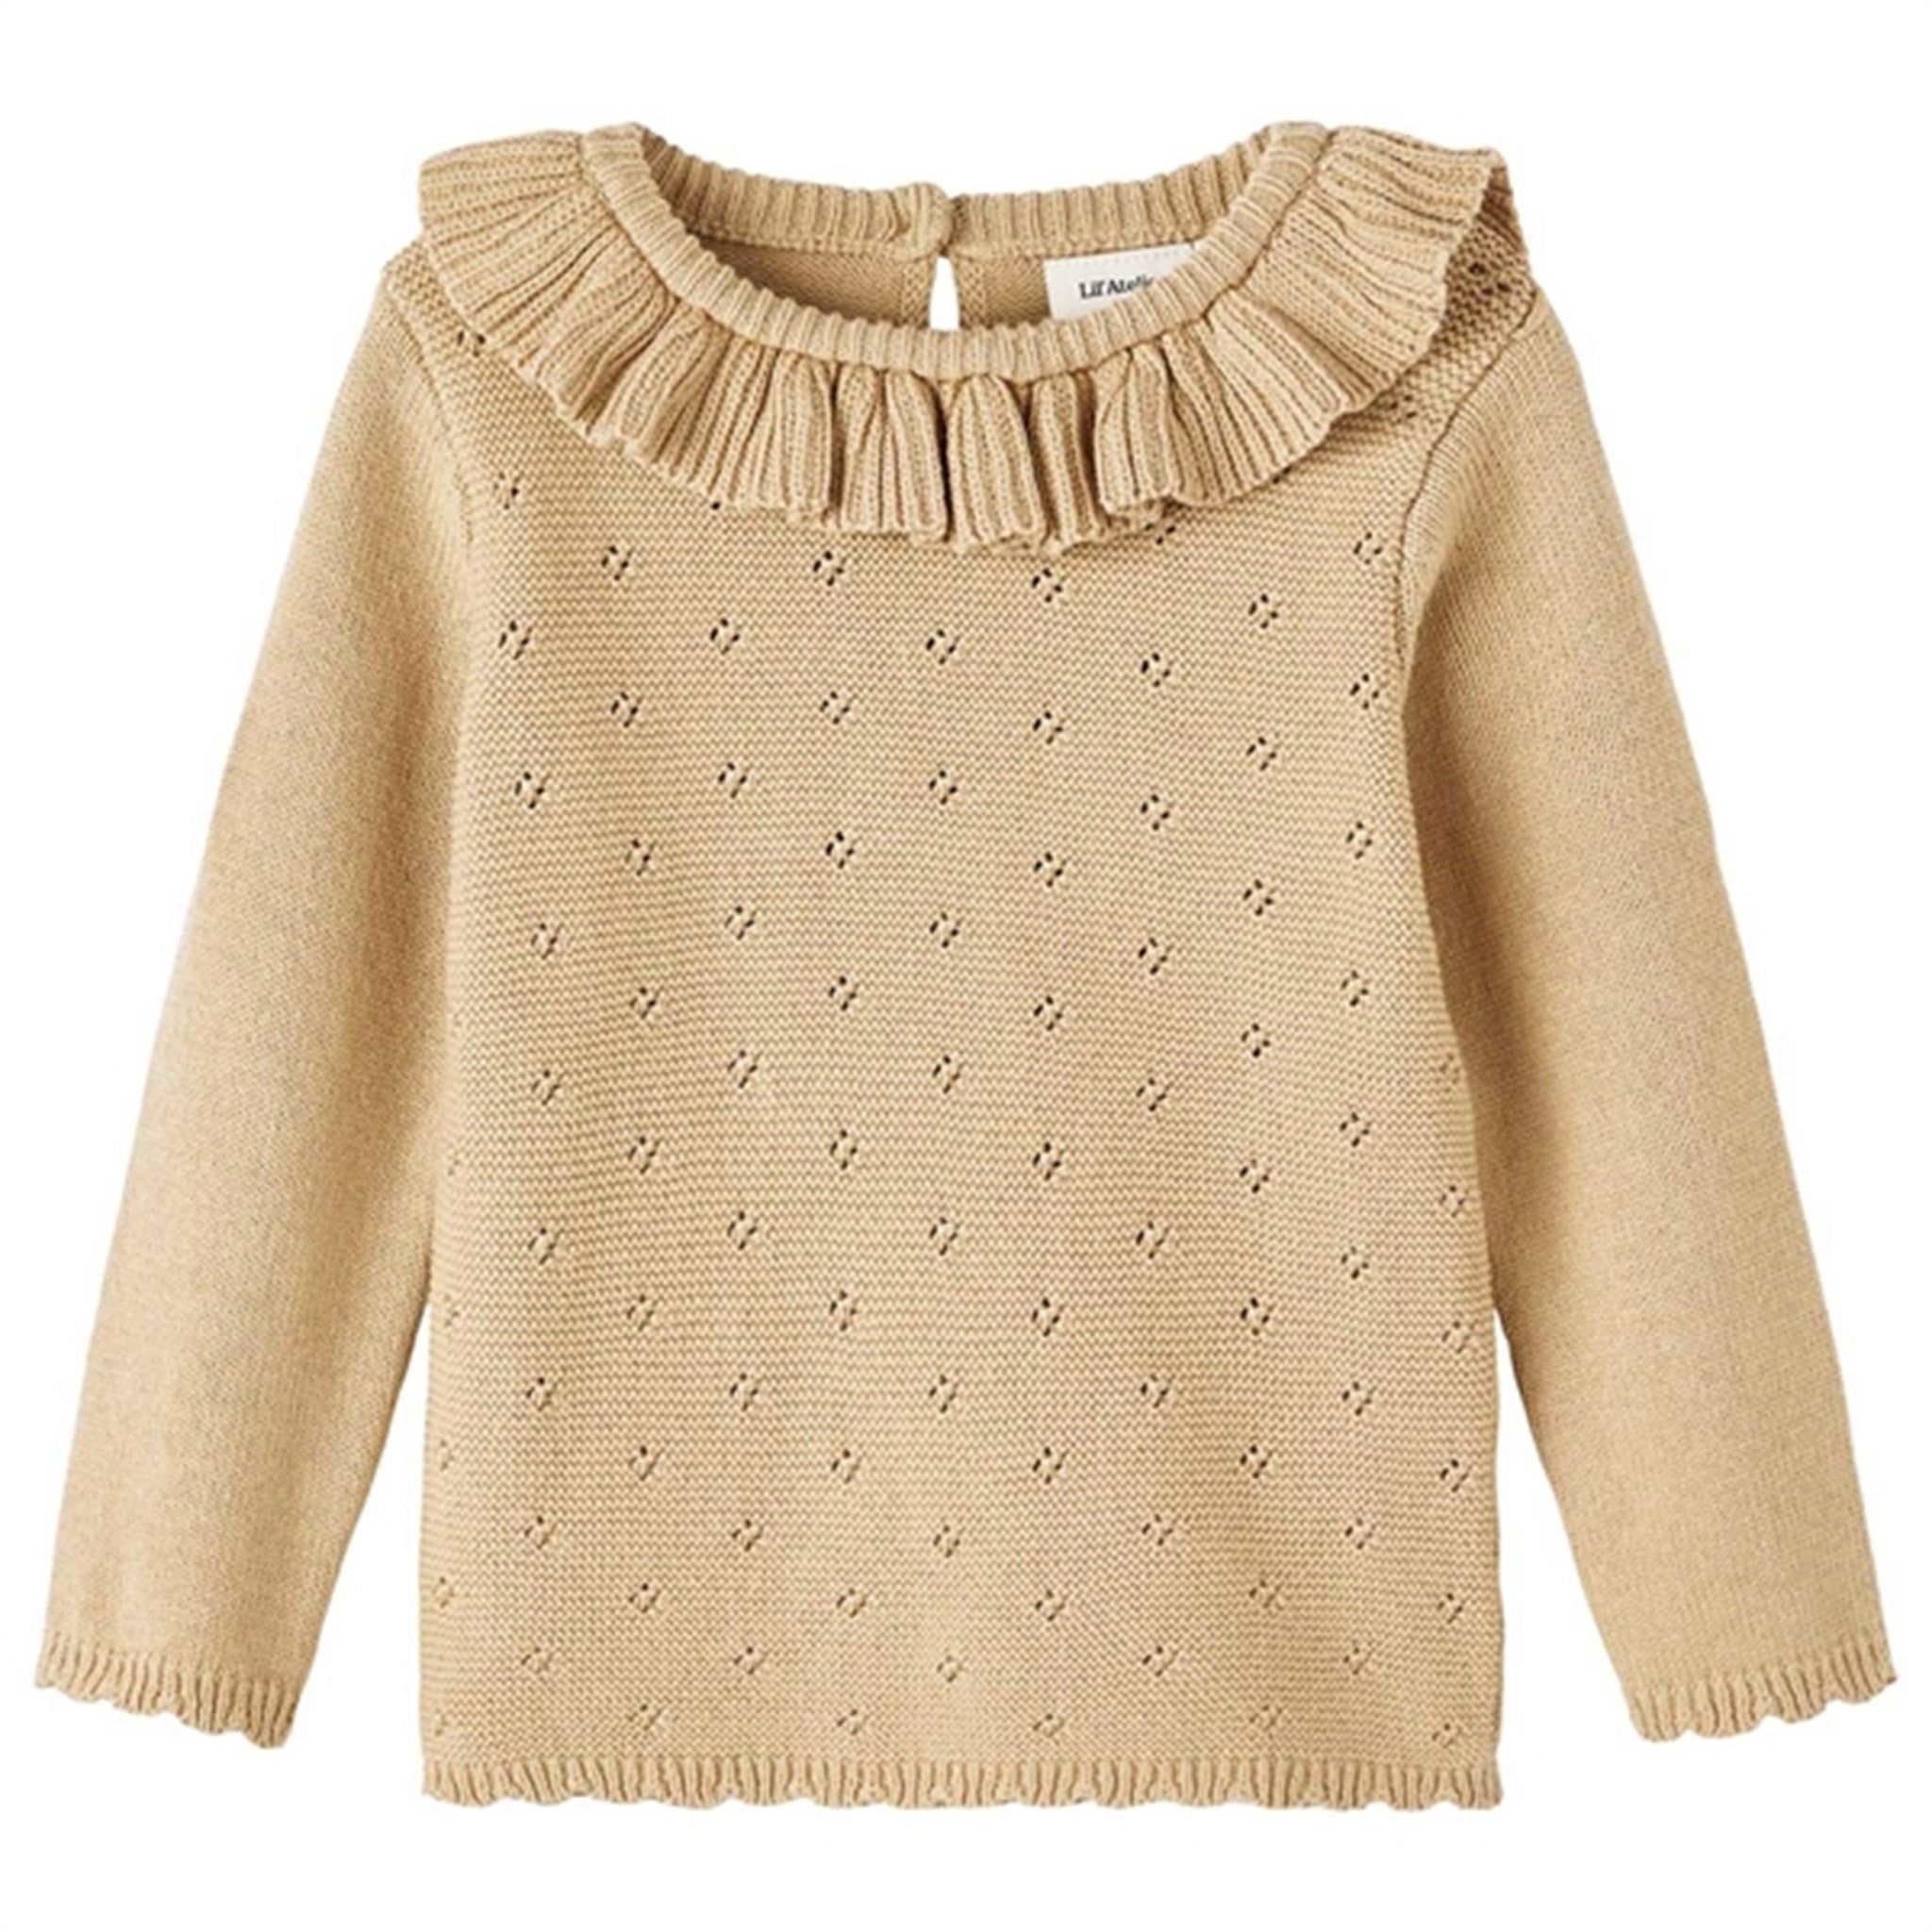 Lil' Atelier Curds & Whey Laguno Knit